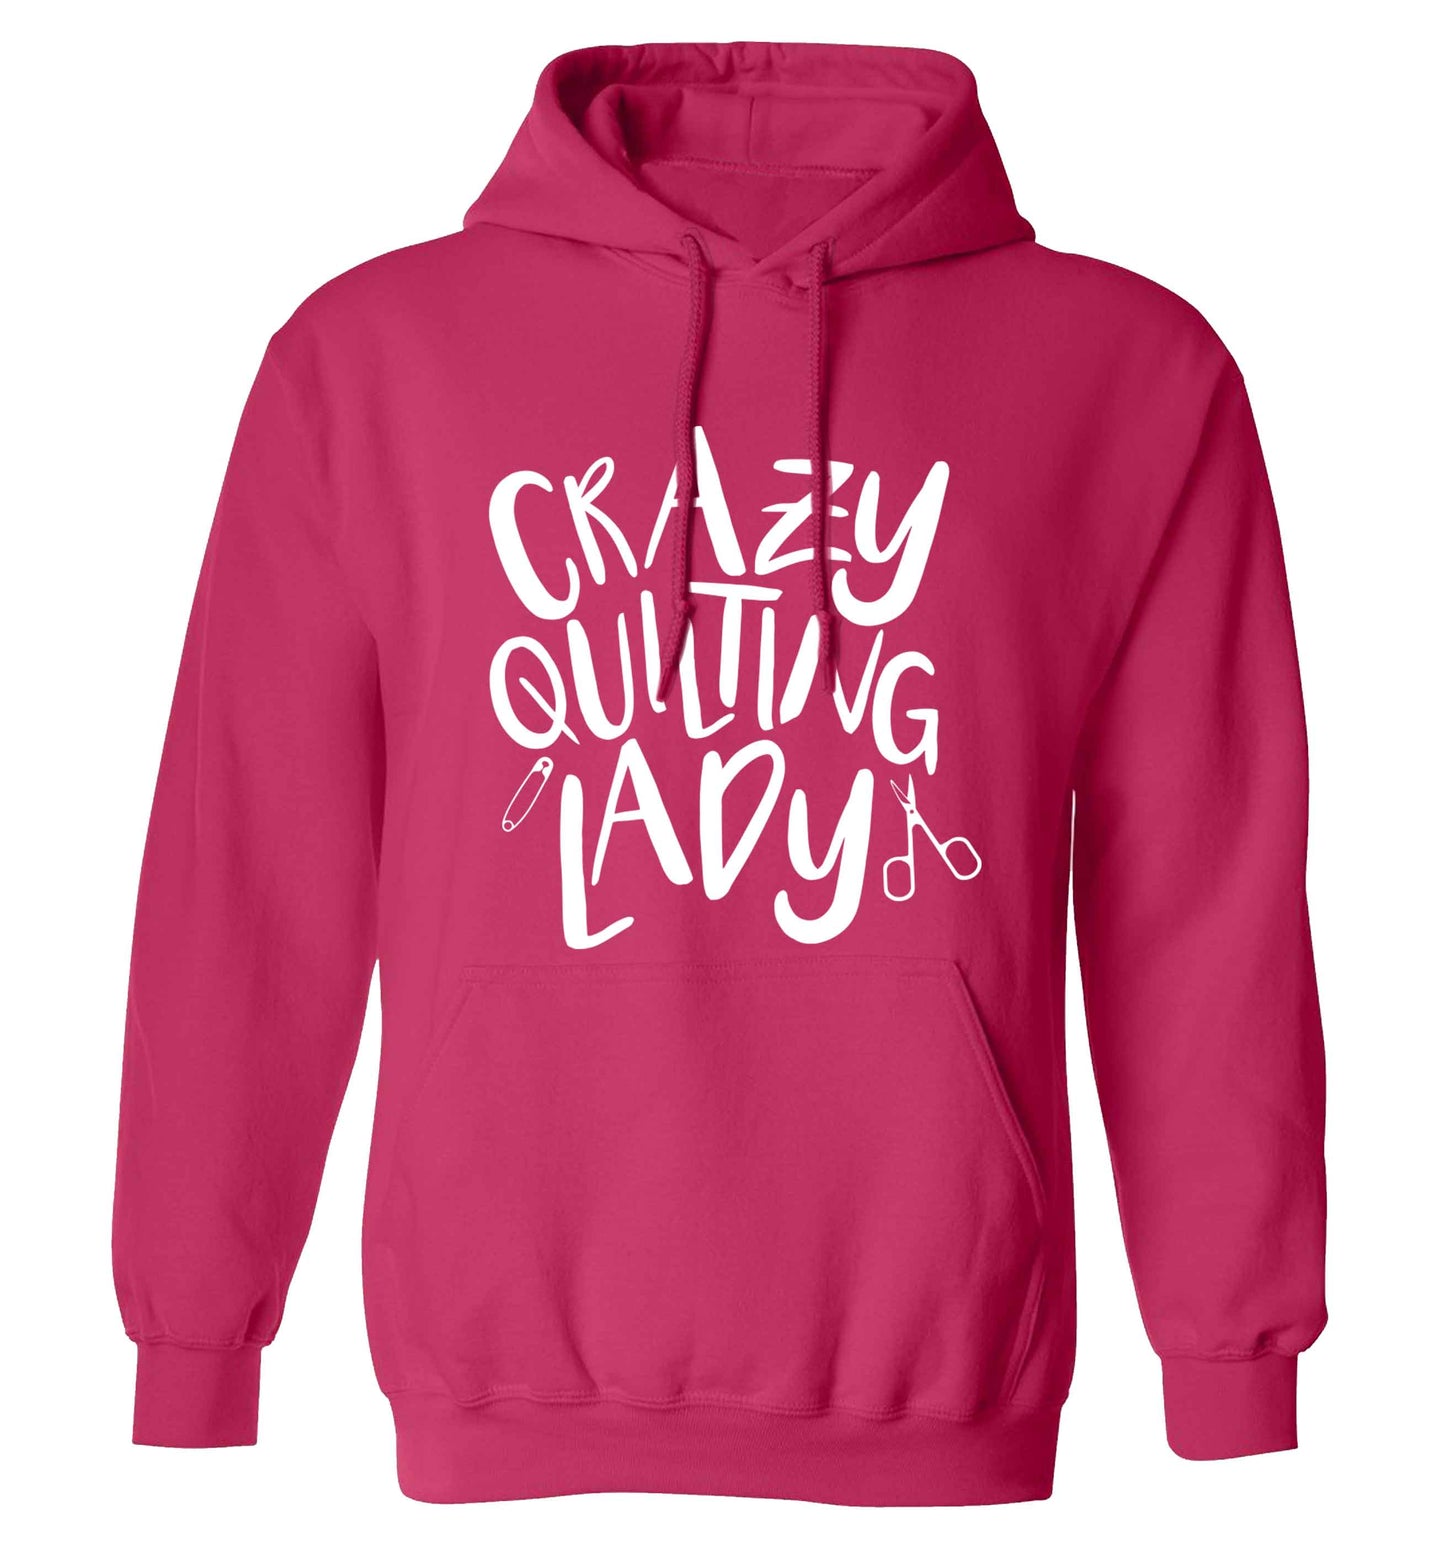 Crazy quilting lady adults unisex pink hoodie 2XL